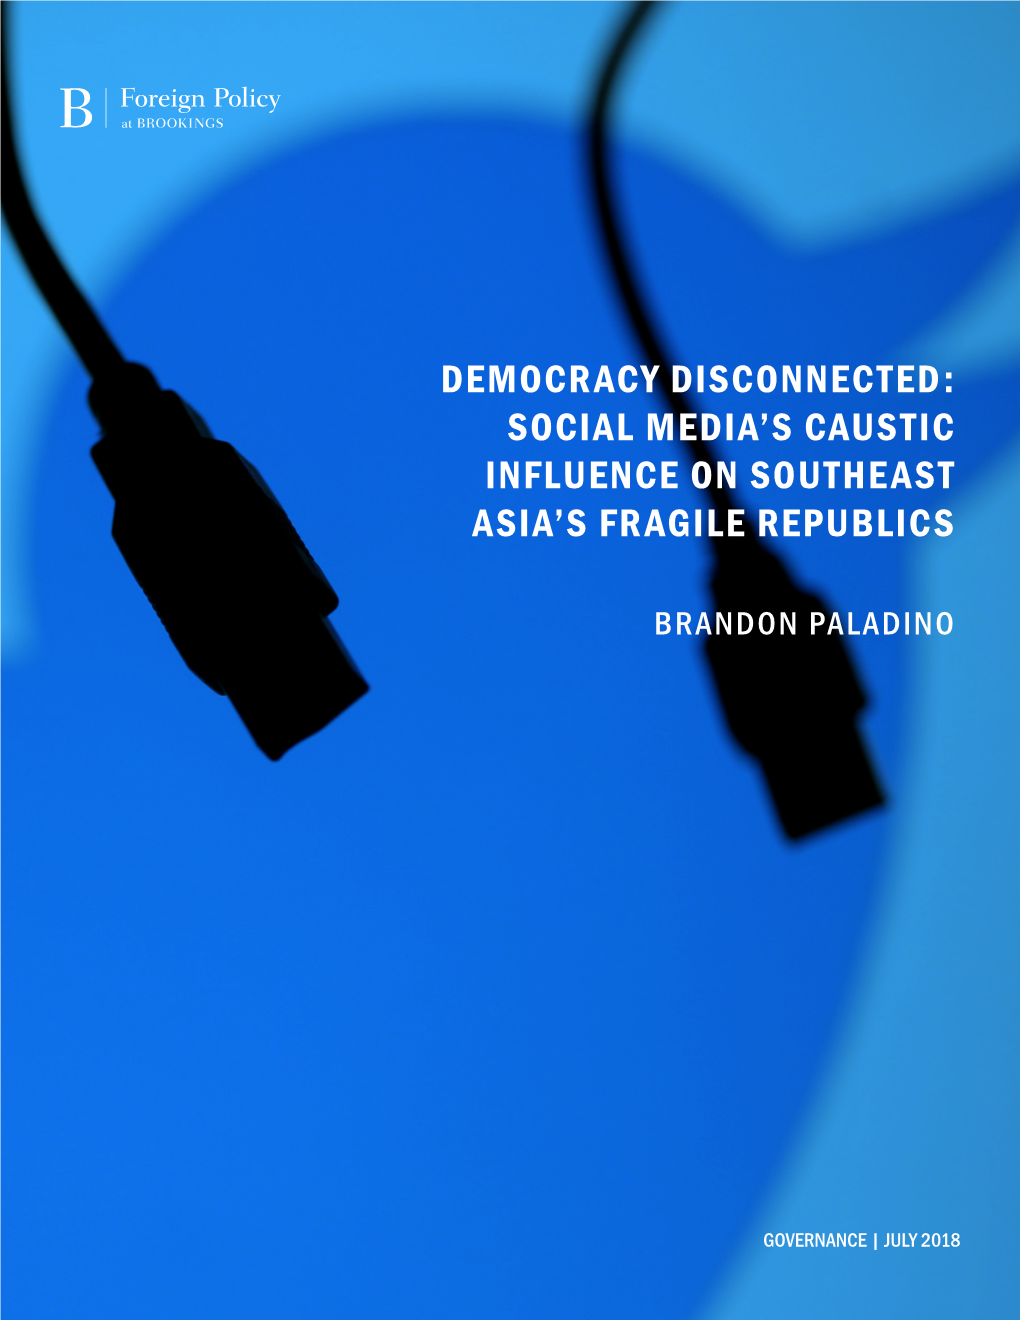 Social Media's Caustic Influence on Southeast Asia's Fragile Republics